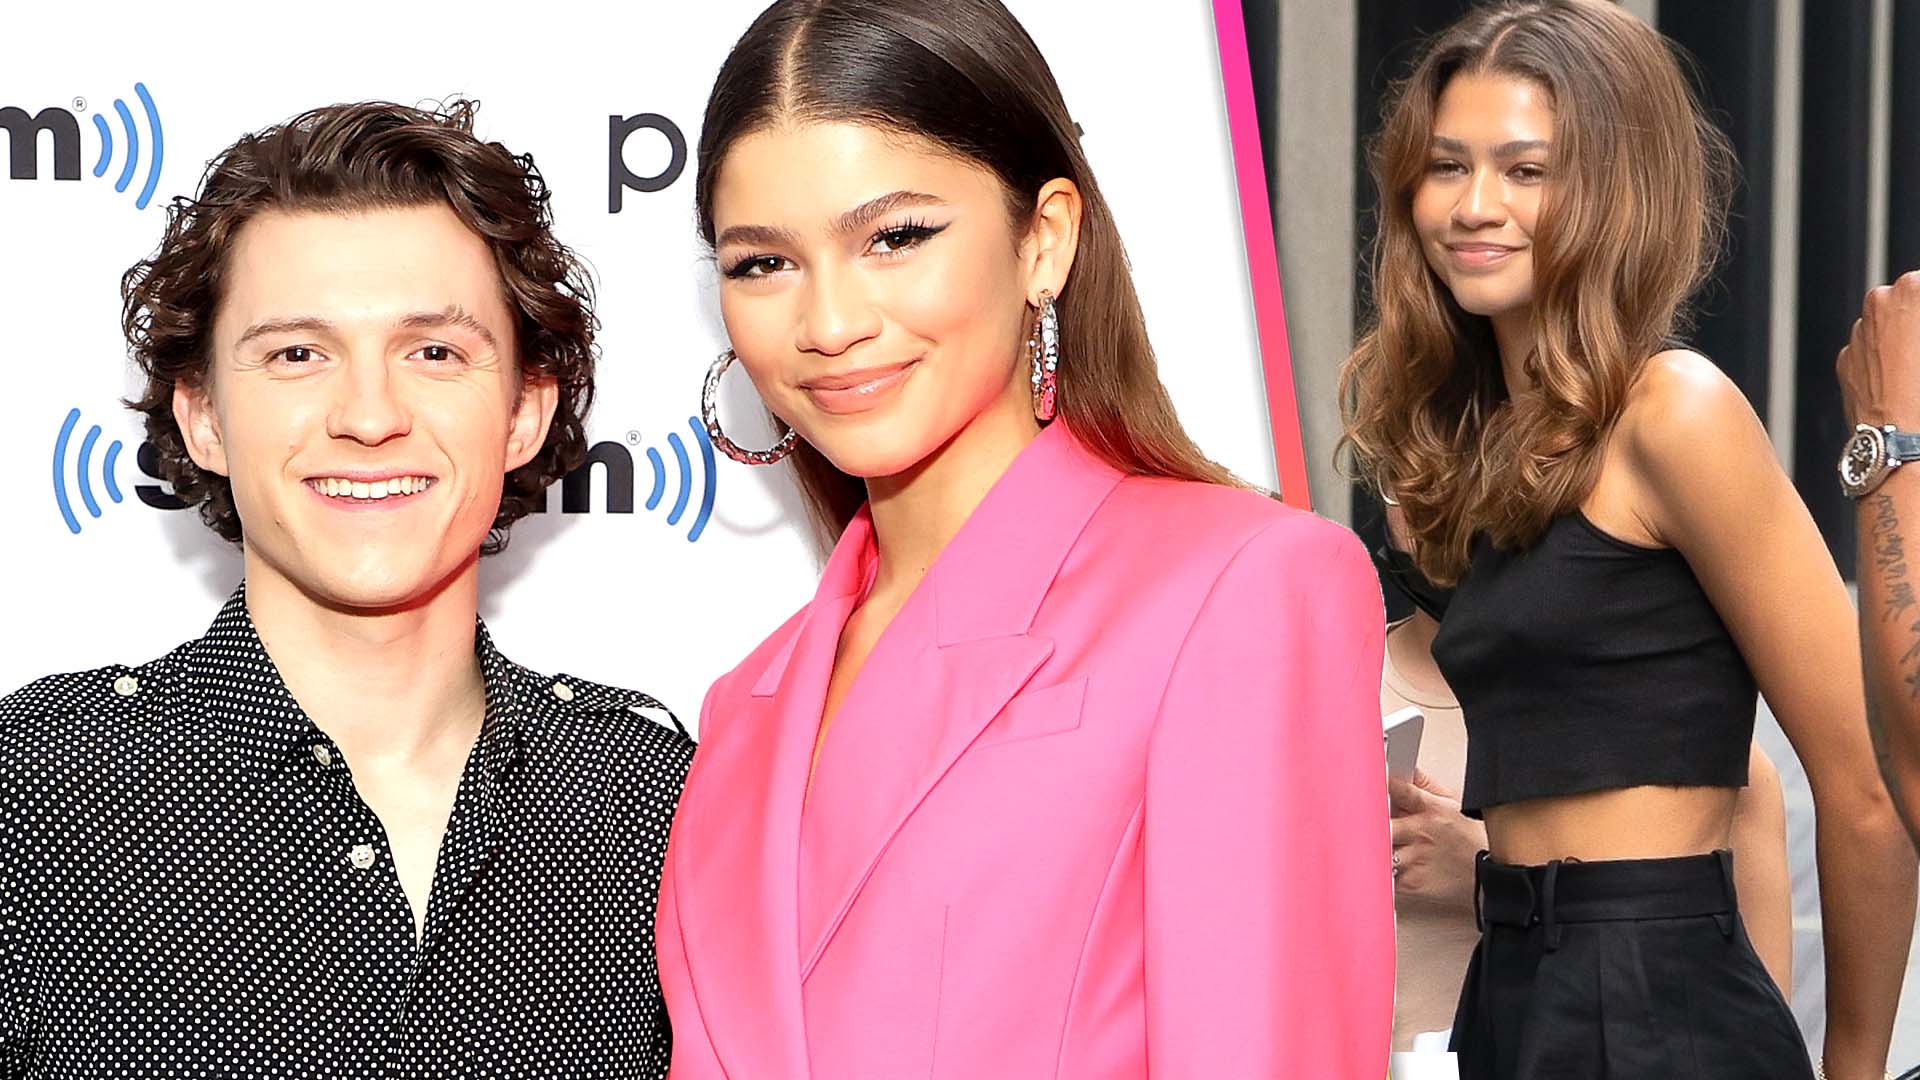 You can share an NYC building with Zendaya and Tom Holland